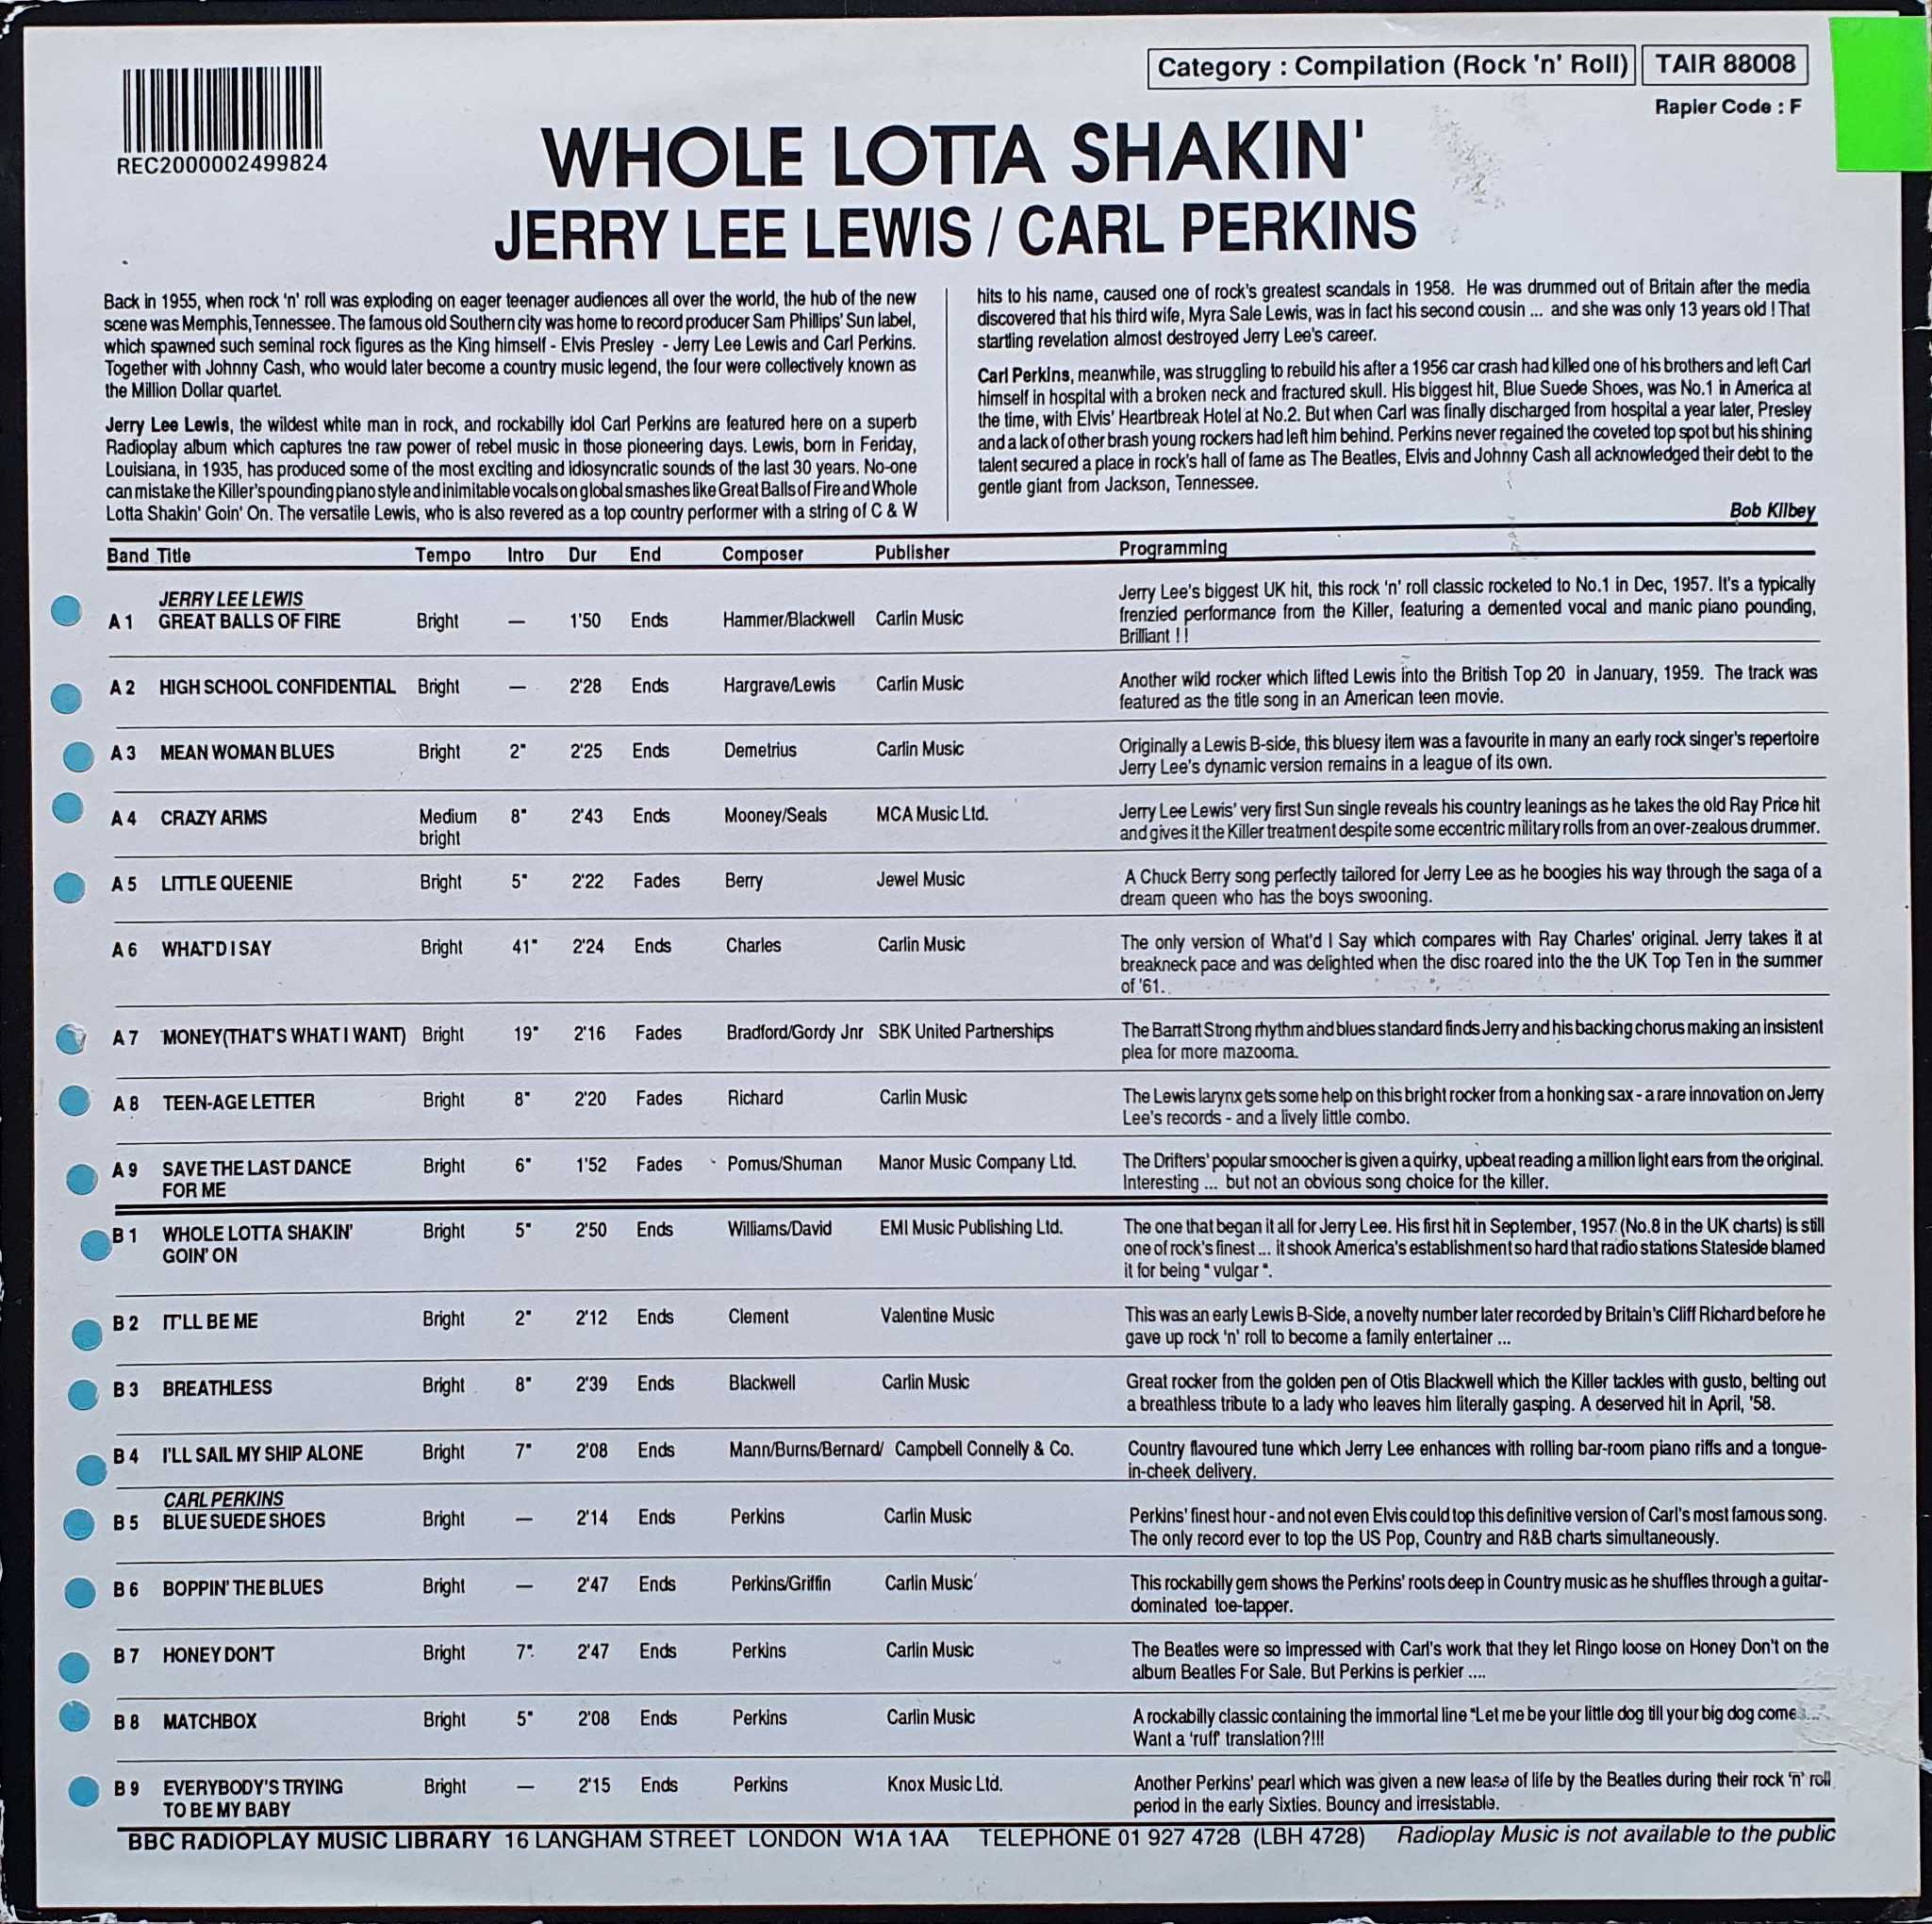 Picture of TAIR 88008 Whole lotta shakin' by artist Jerry Lew Lewis / Carl Perkins from the BBC records and Tapes library